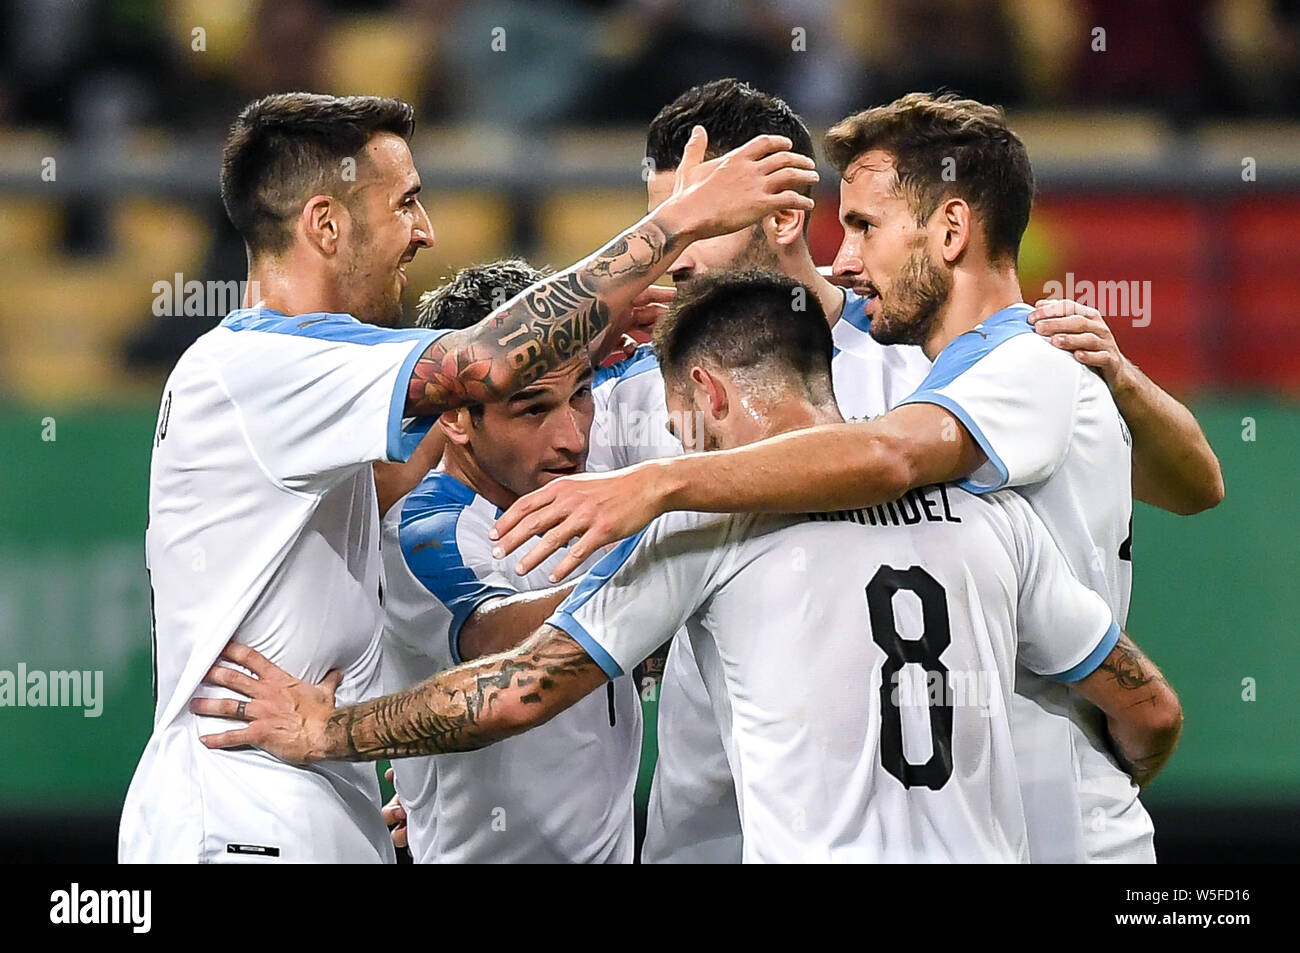 Cristhian Stuani, right, of Uruguay celebrates with teammates after scoring Uruguay's second goal against Uzbekistan during their semi-final match of Stock Photo